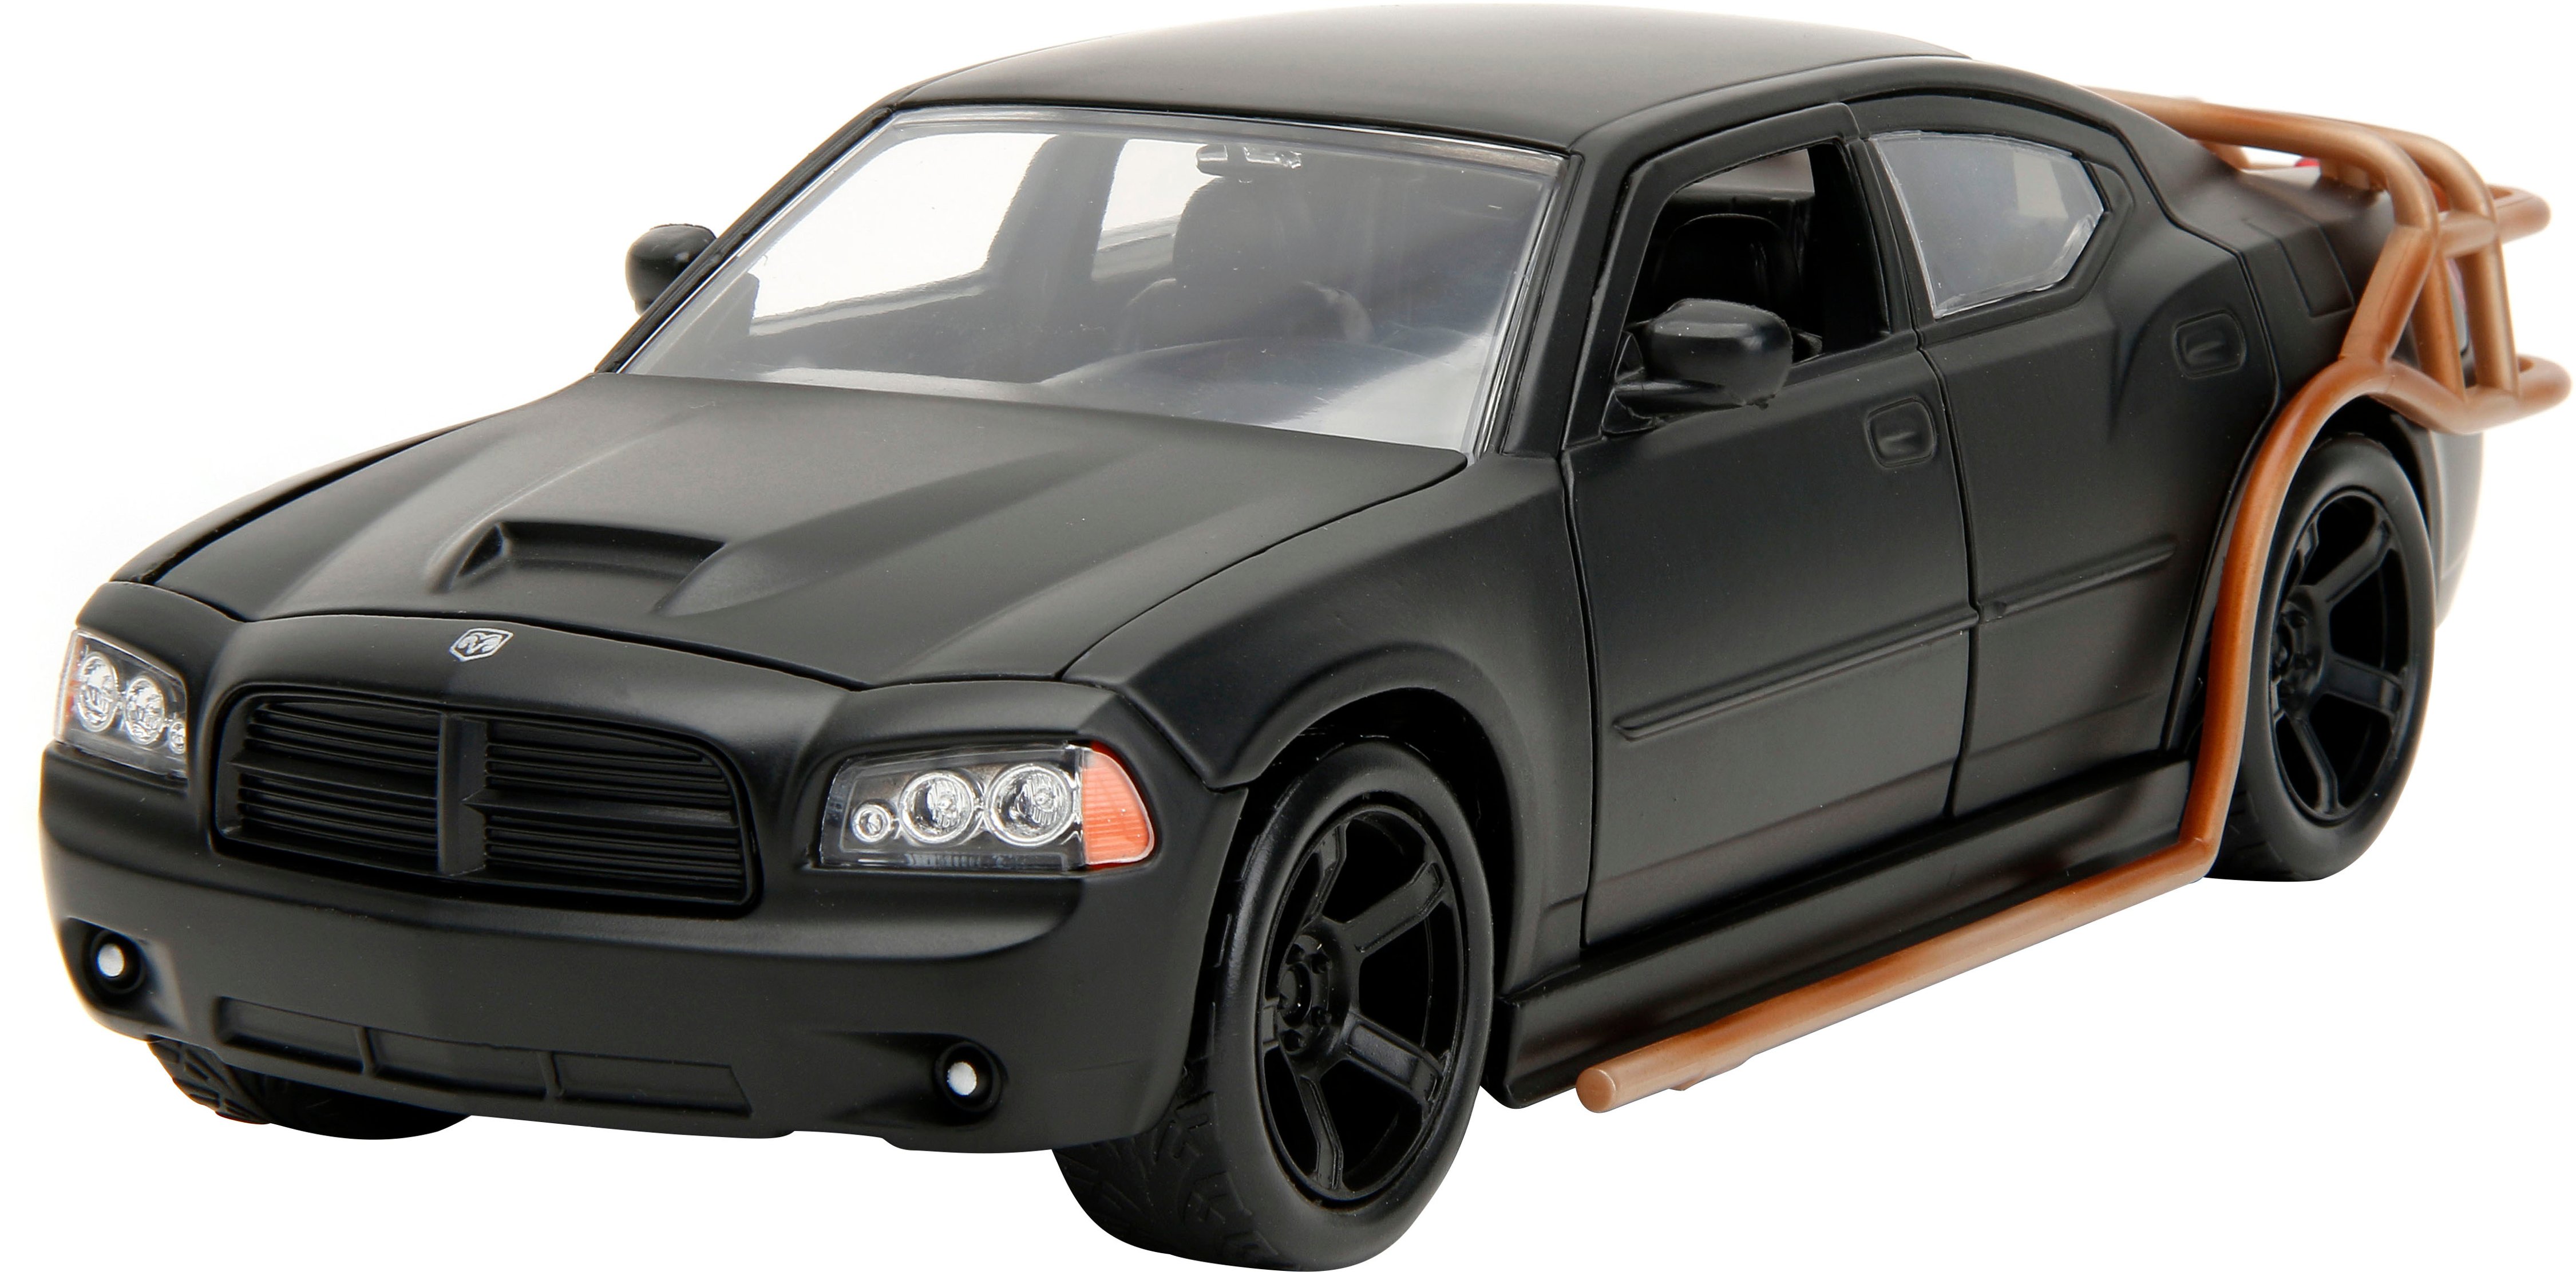 Funko Pop! Rides Fast & Furious 1970 Charger with Dom Toretto